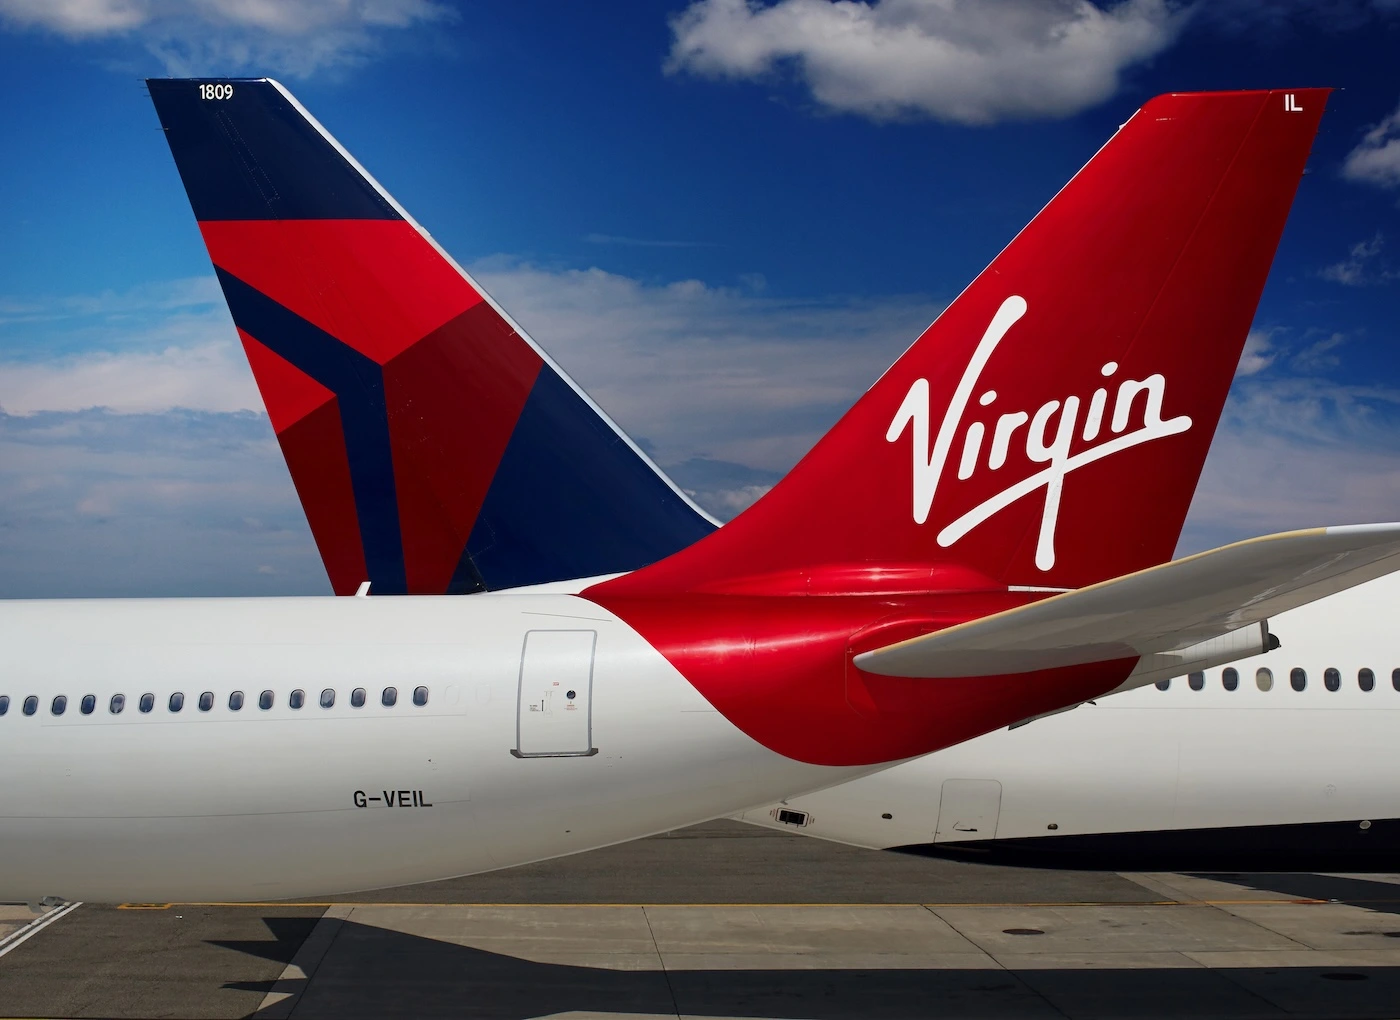 Virgin Atlantic partnership with Delta lasted for over 10 years.